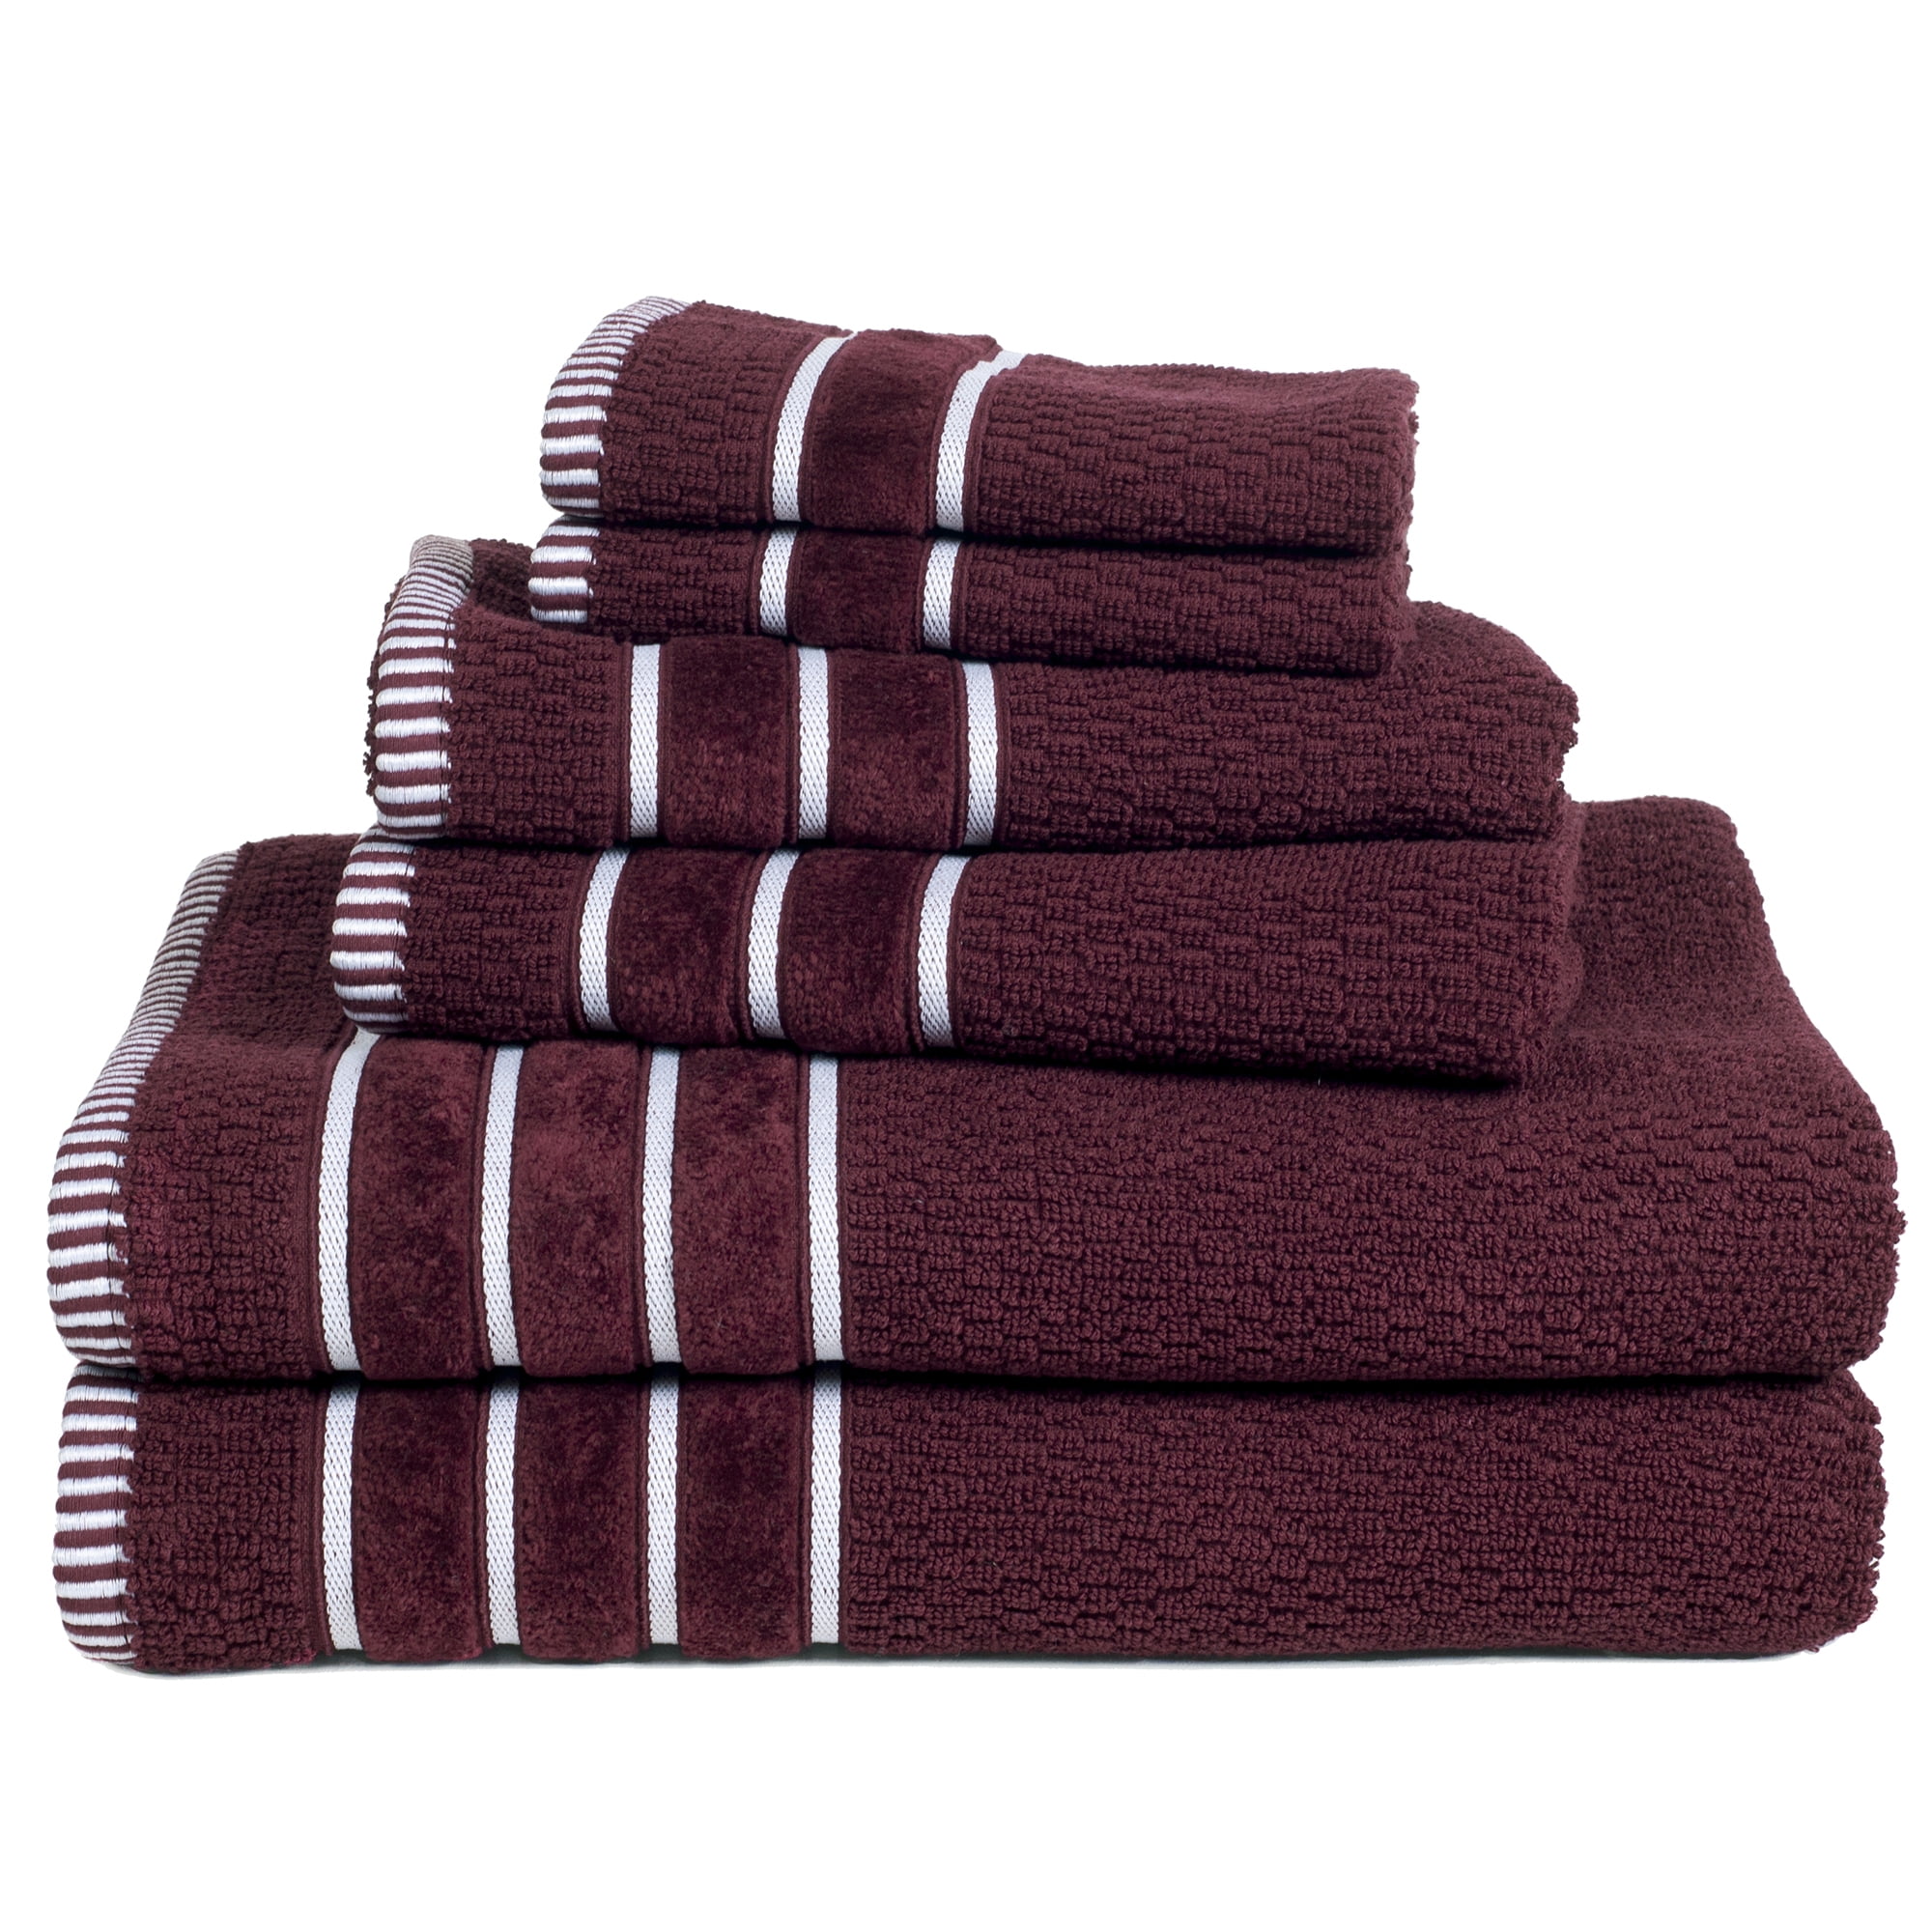 CAT LOVER BURGUNDY Round Hand Towels - High quality super soft and  absorbent thick cotton fabric - Decorative Kitchen Bathroom Towels - French  Cat Lover Gifts - French Country Home Decor